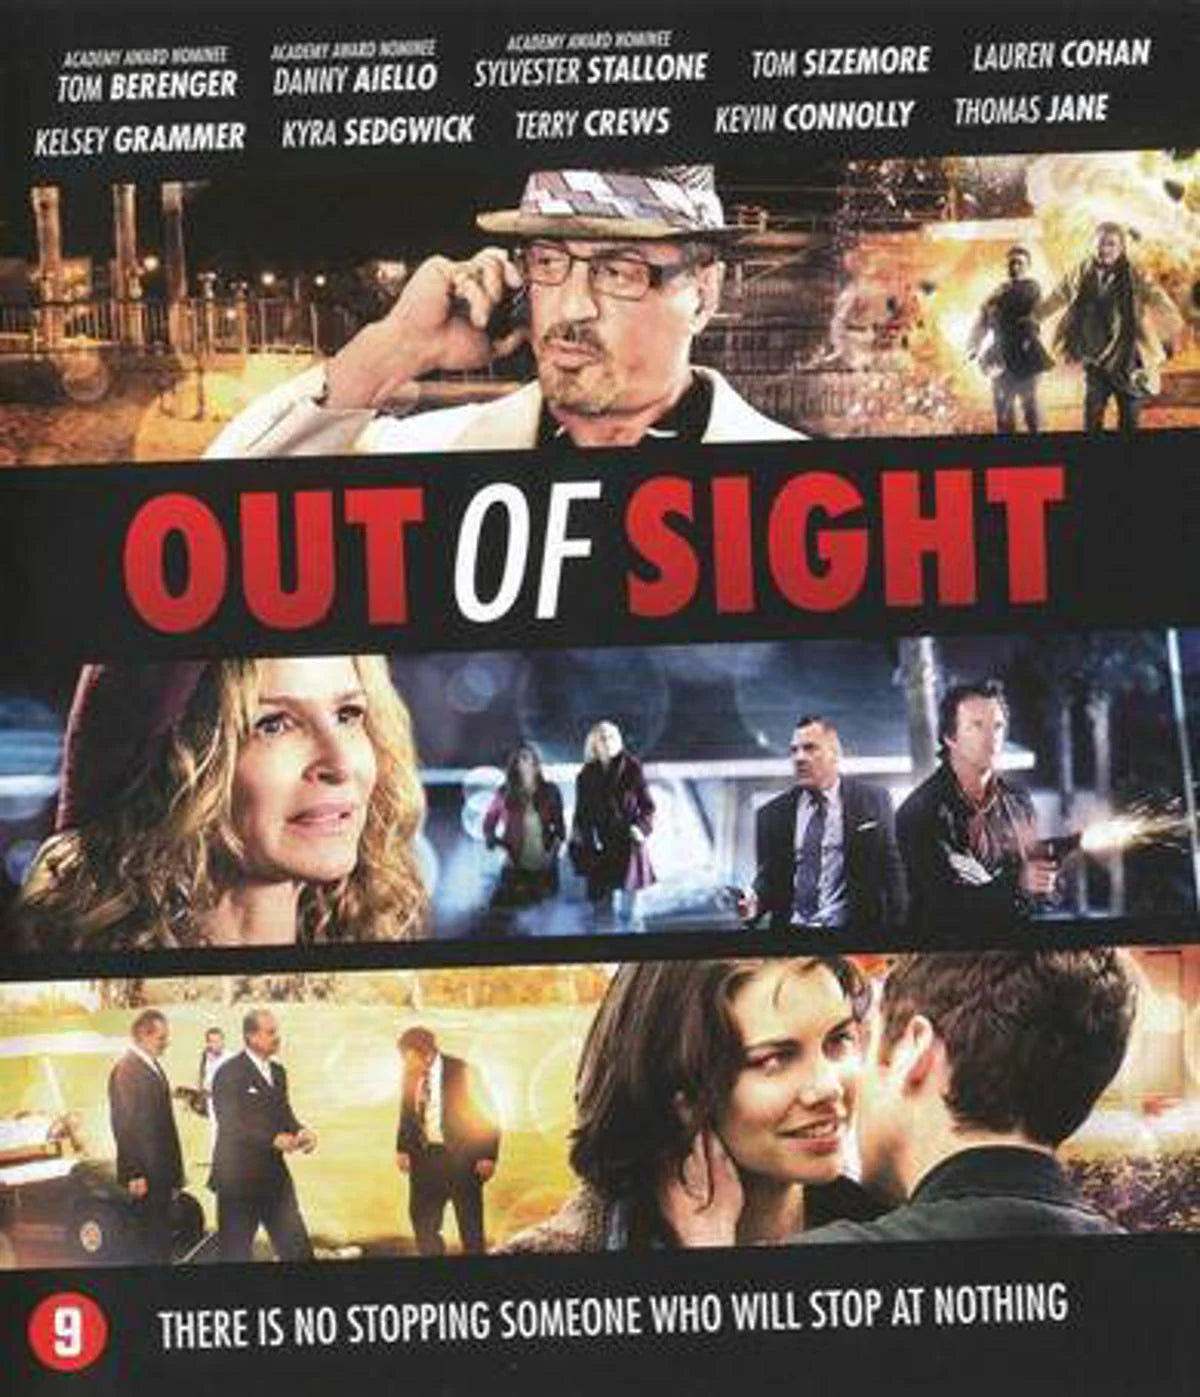 OUT OF SIGHT